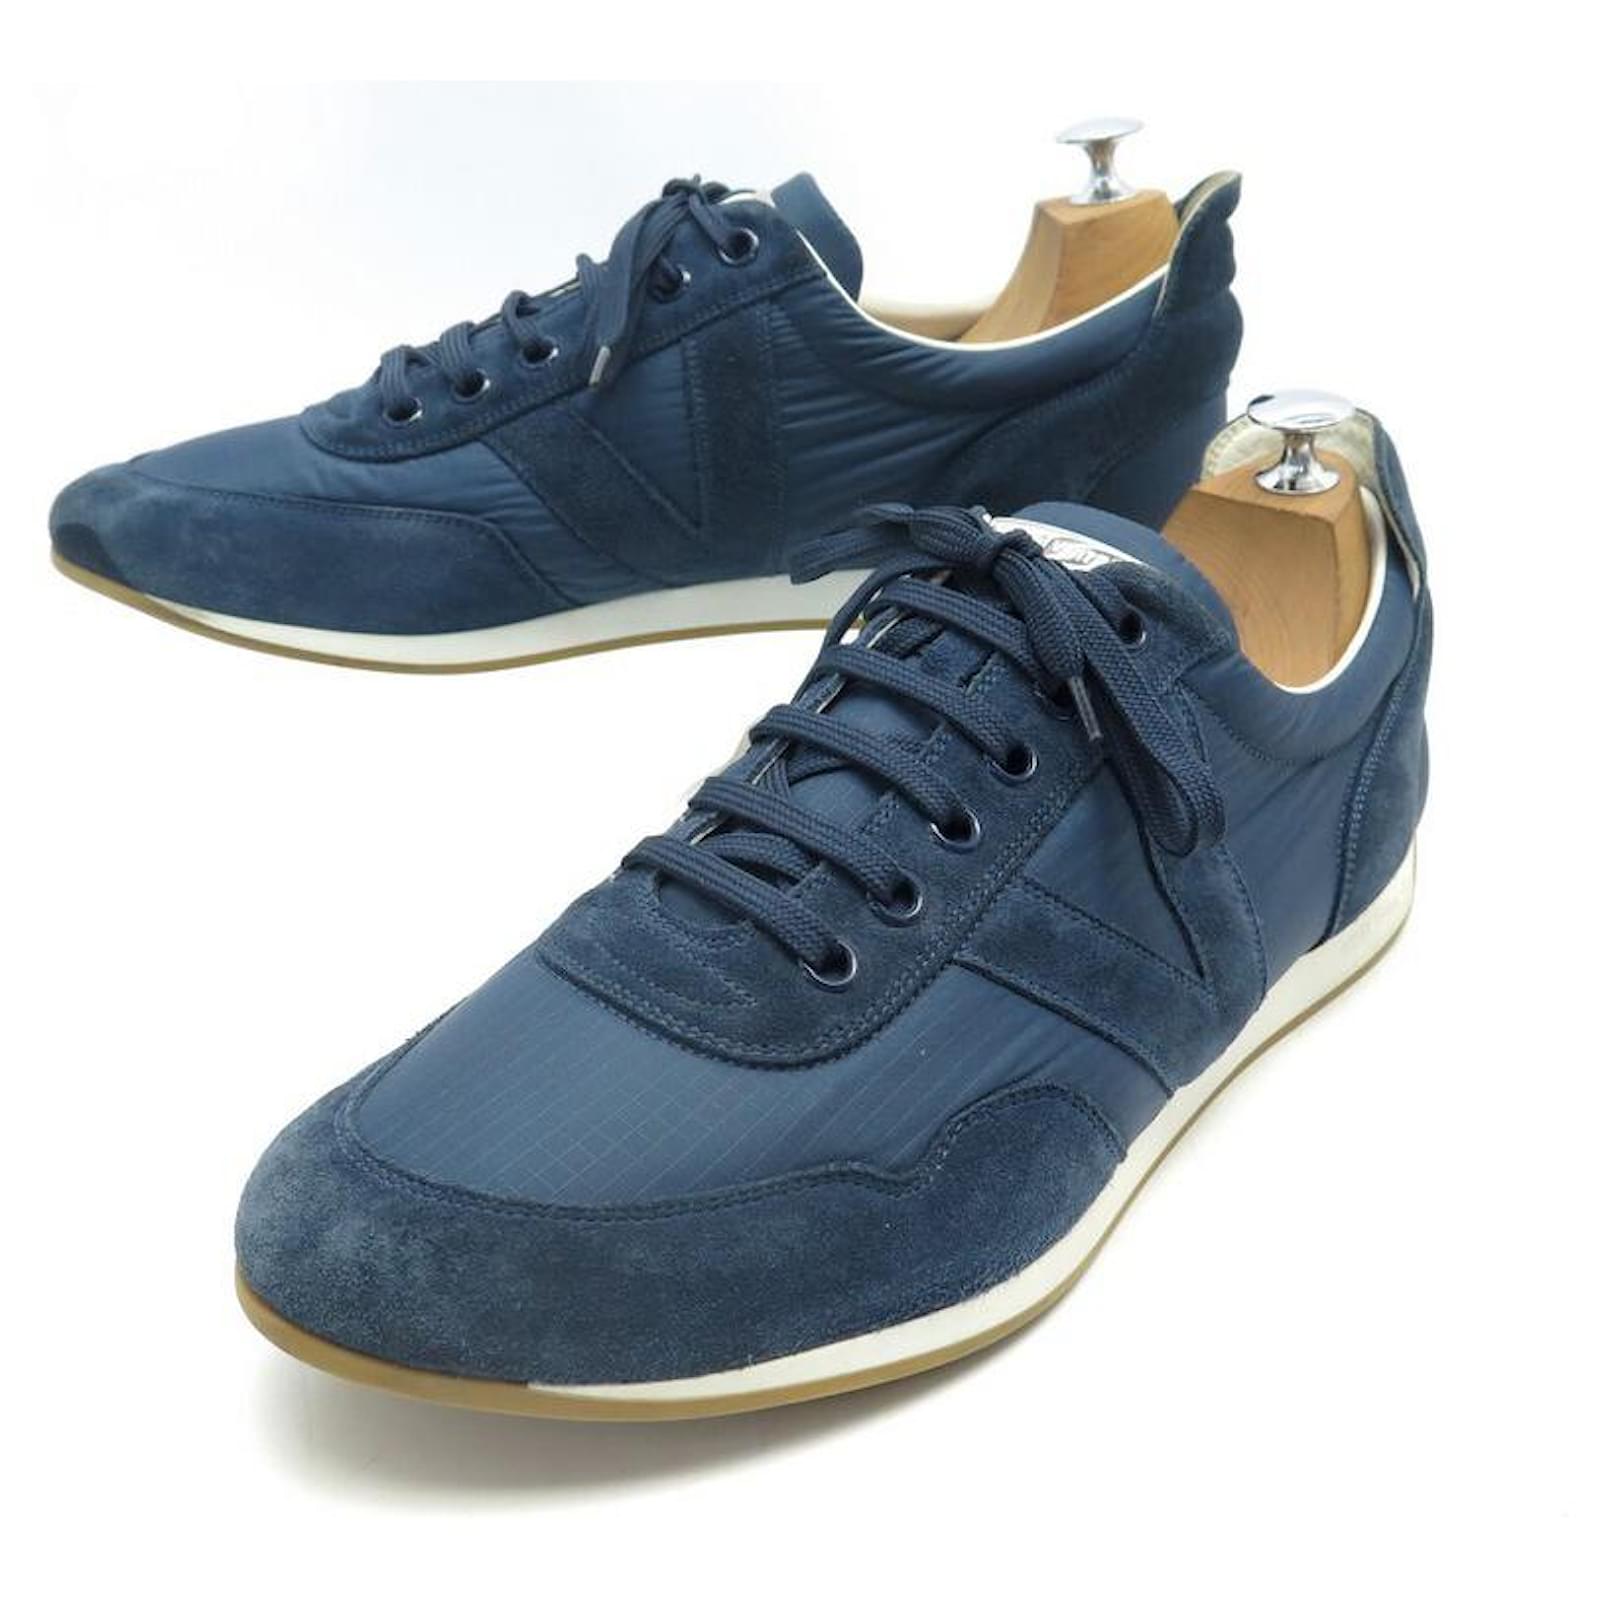 LOUIS SHOES 11 45 IN BLUE CANVAS & SUEDE SNEAKERS SHOES Leather ref.574175 - Joli Closet